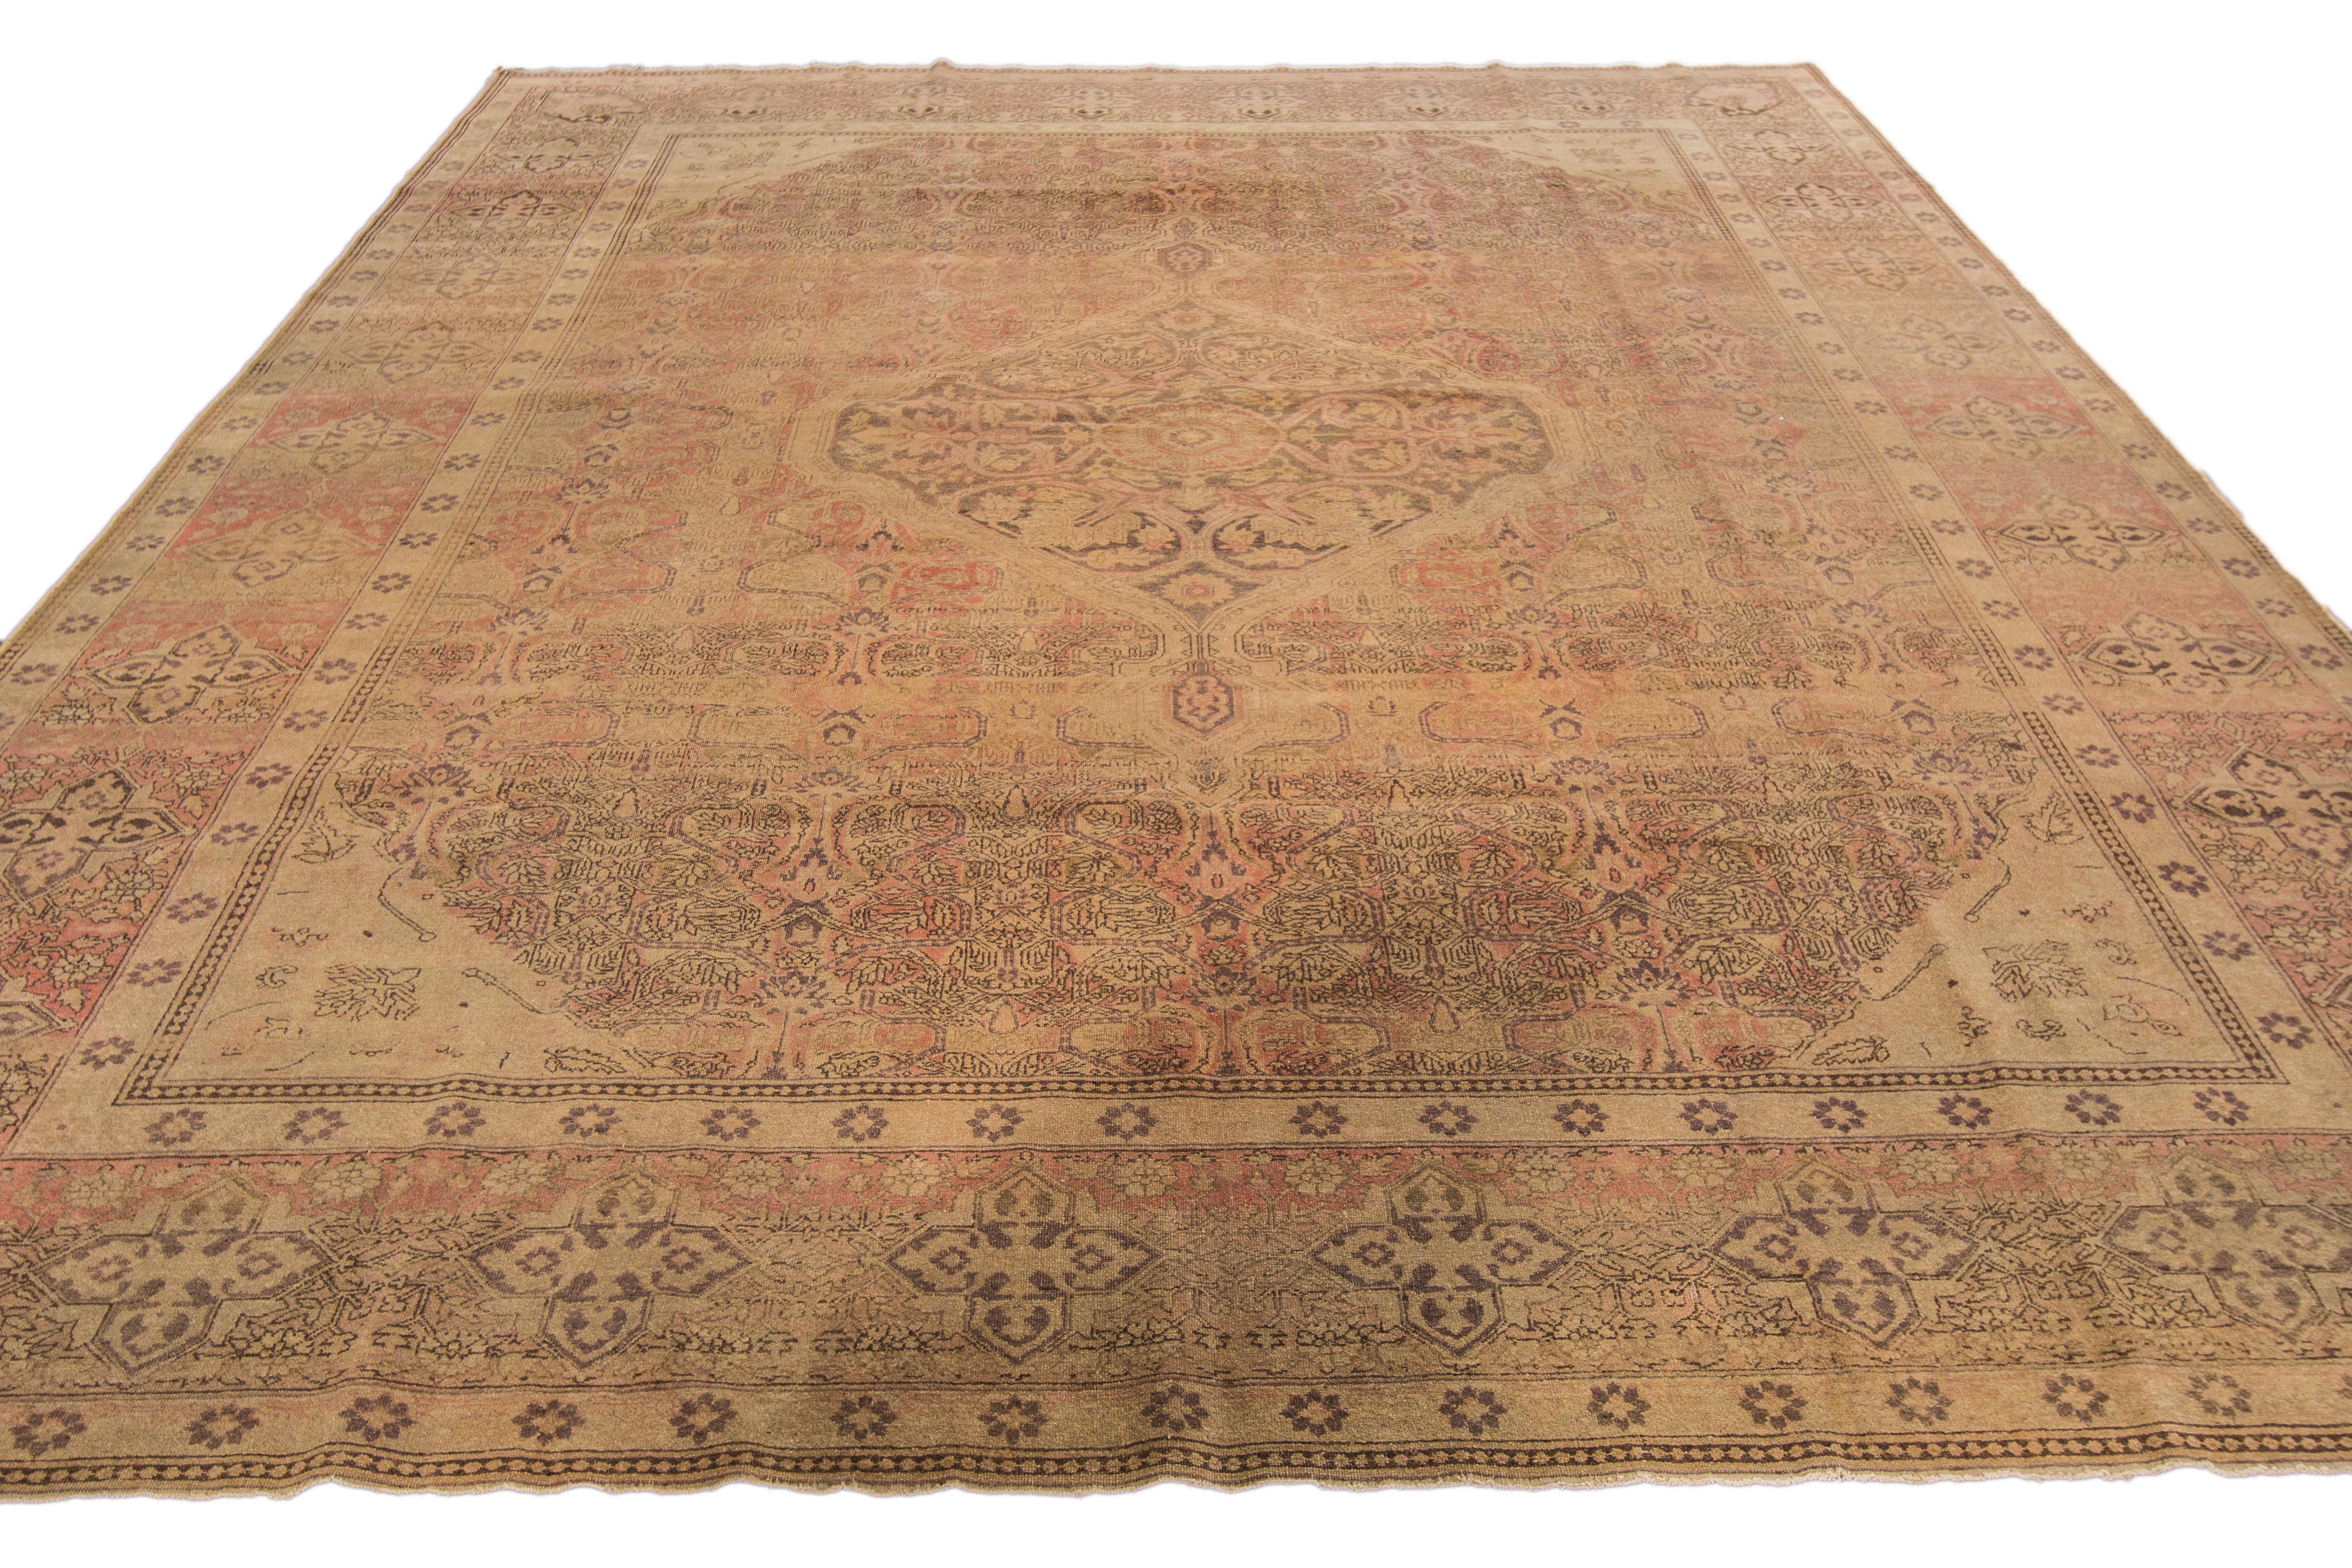 Beautiful antique Tabriz hand-knotted wool rug with the tan field. This Persian piece has a rusted designed frame and accents traditional in all-over medallion floral design.

This rug measures: 9'1